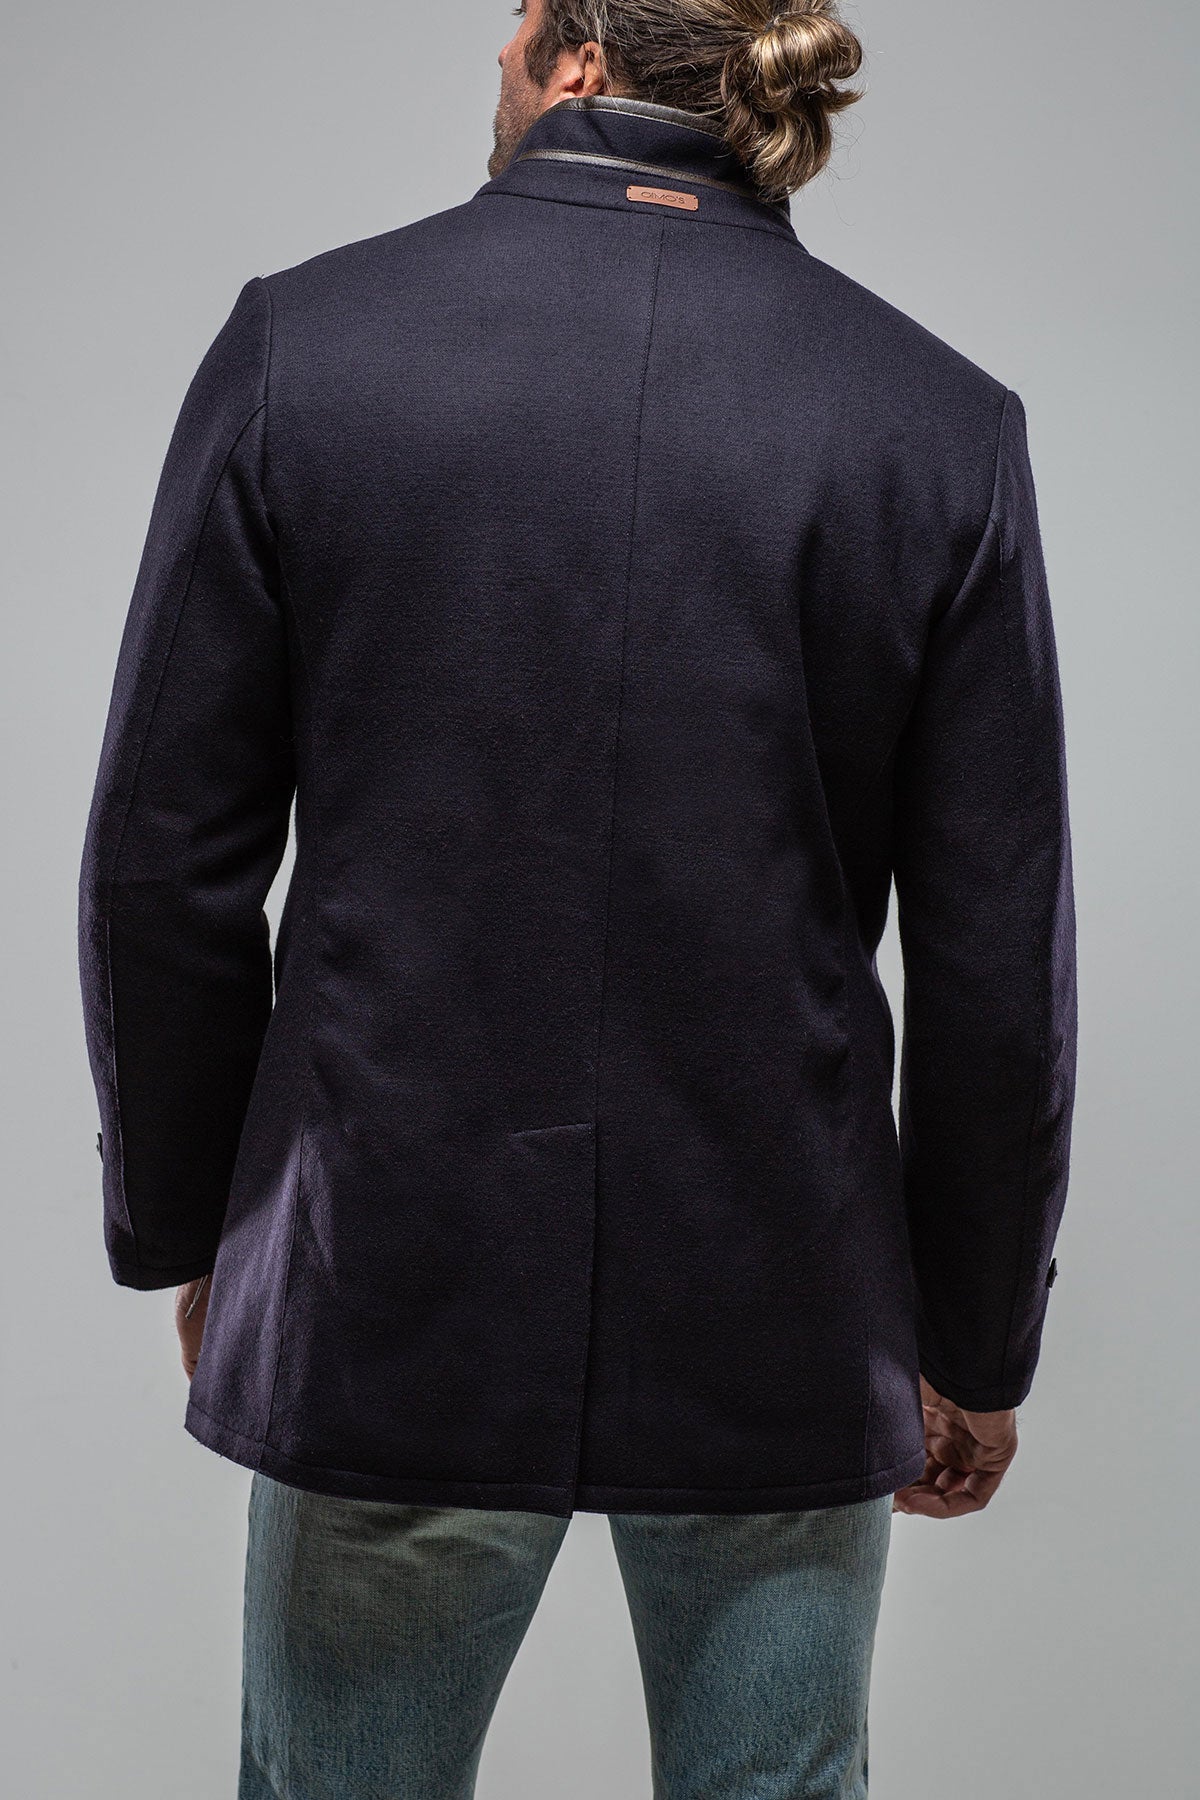 Samuel Wool/Cashmere Overcoat | Warehouse - Mens - Outerwear - Overcoats | Gimo's